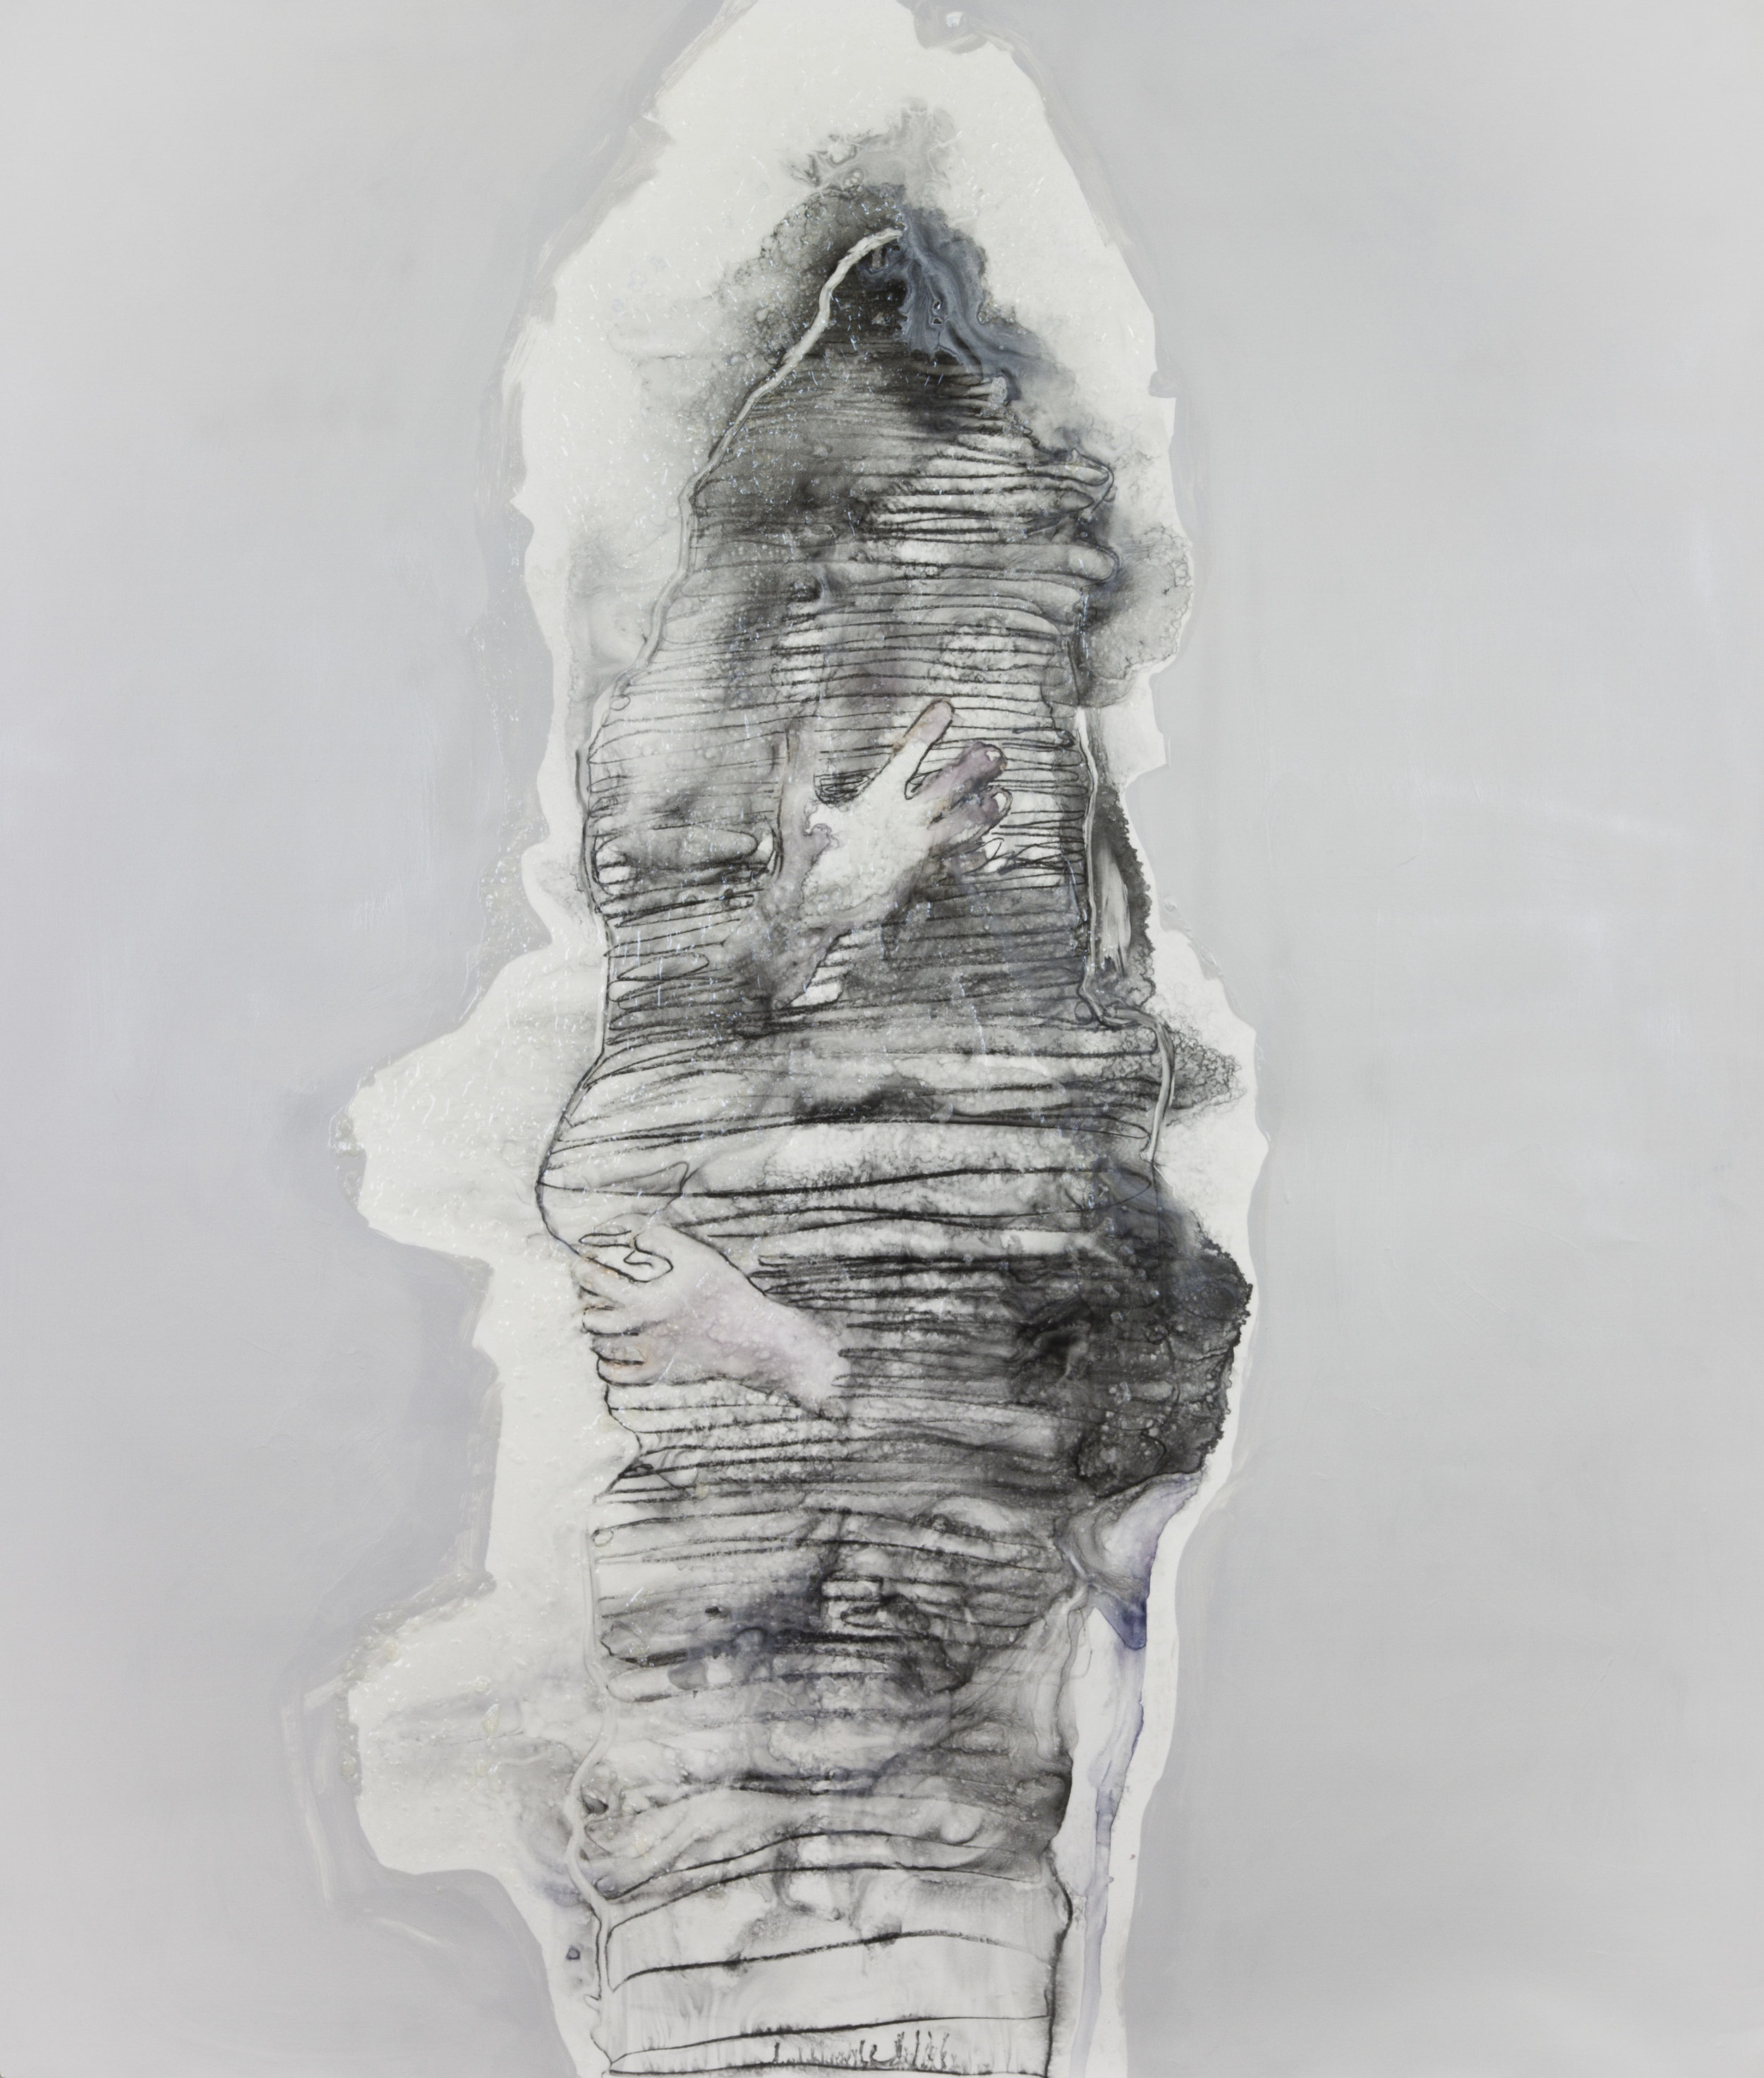 Grey Matter, 2012, watercolor and acrylic on polypropylene, 60x69 inches